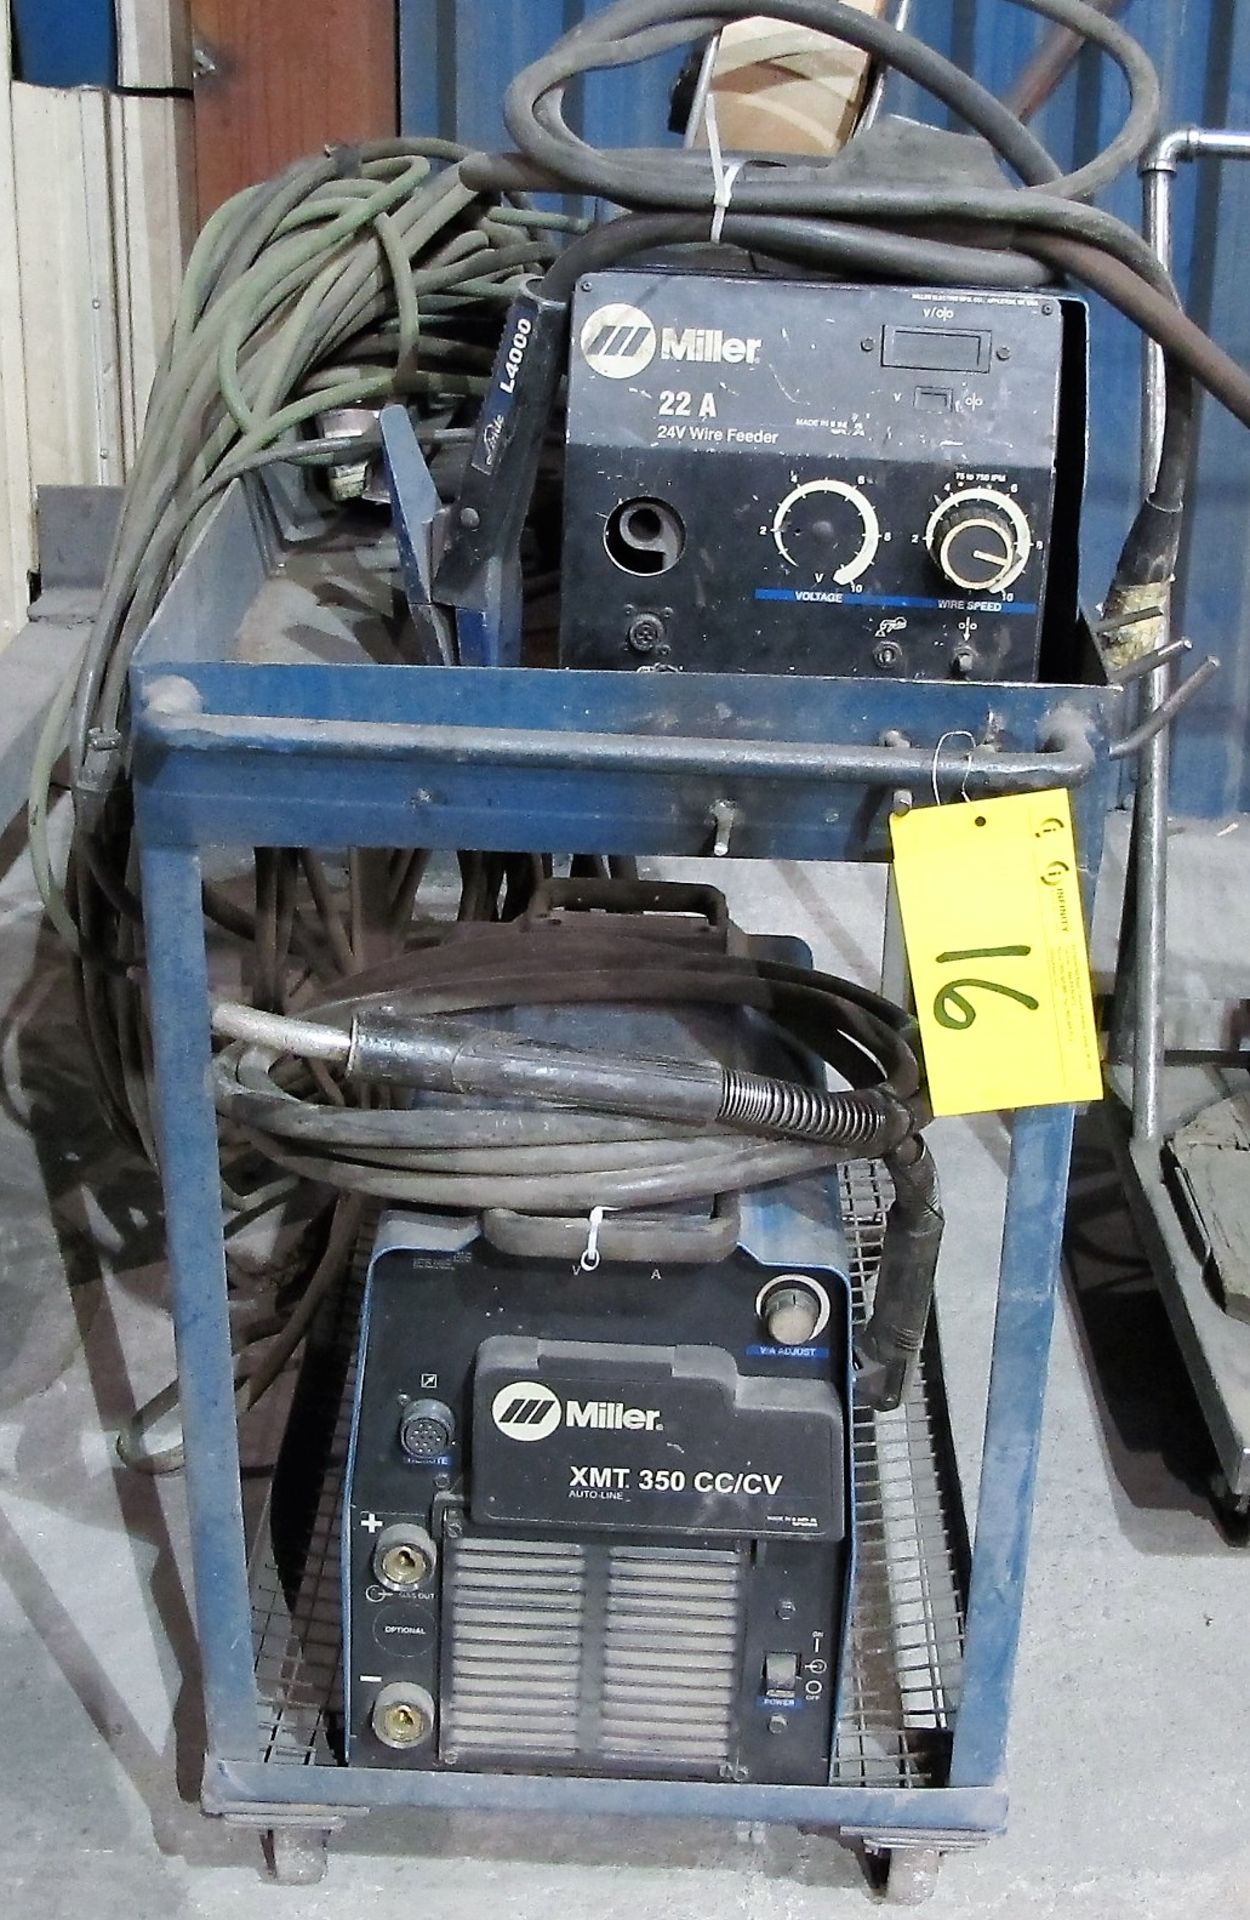 MILLER XMT 350 CC/CW WELDER, S/N LF470022A W/ MILLER 22A WIRE FEEDER, CABLES & CART